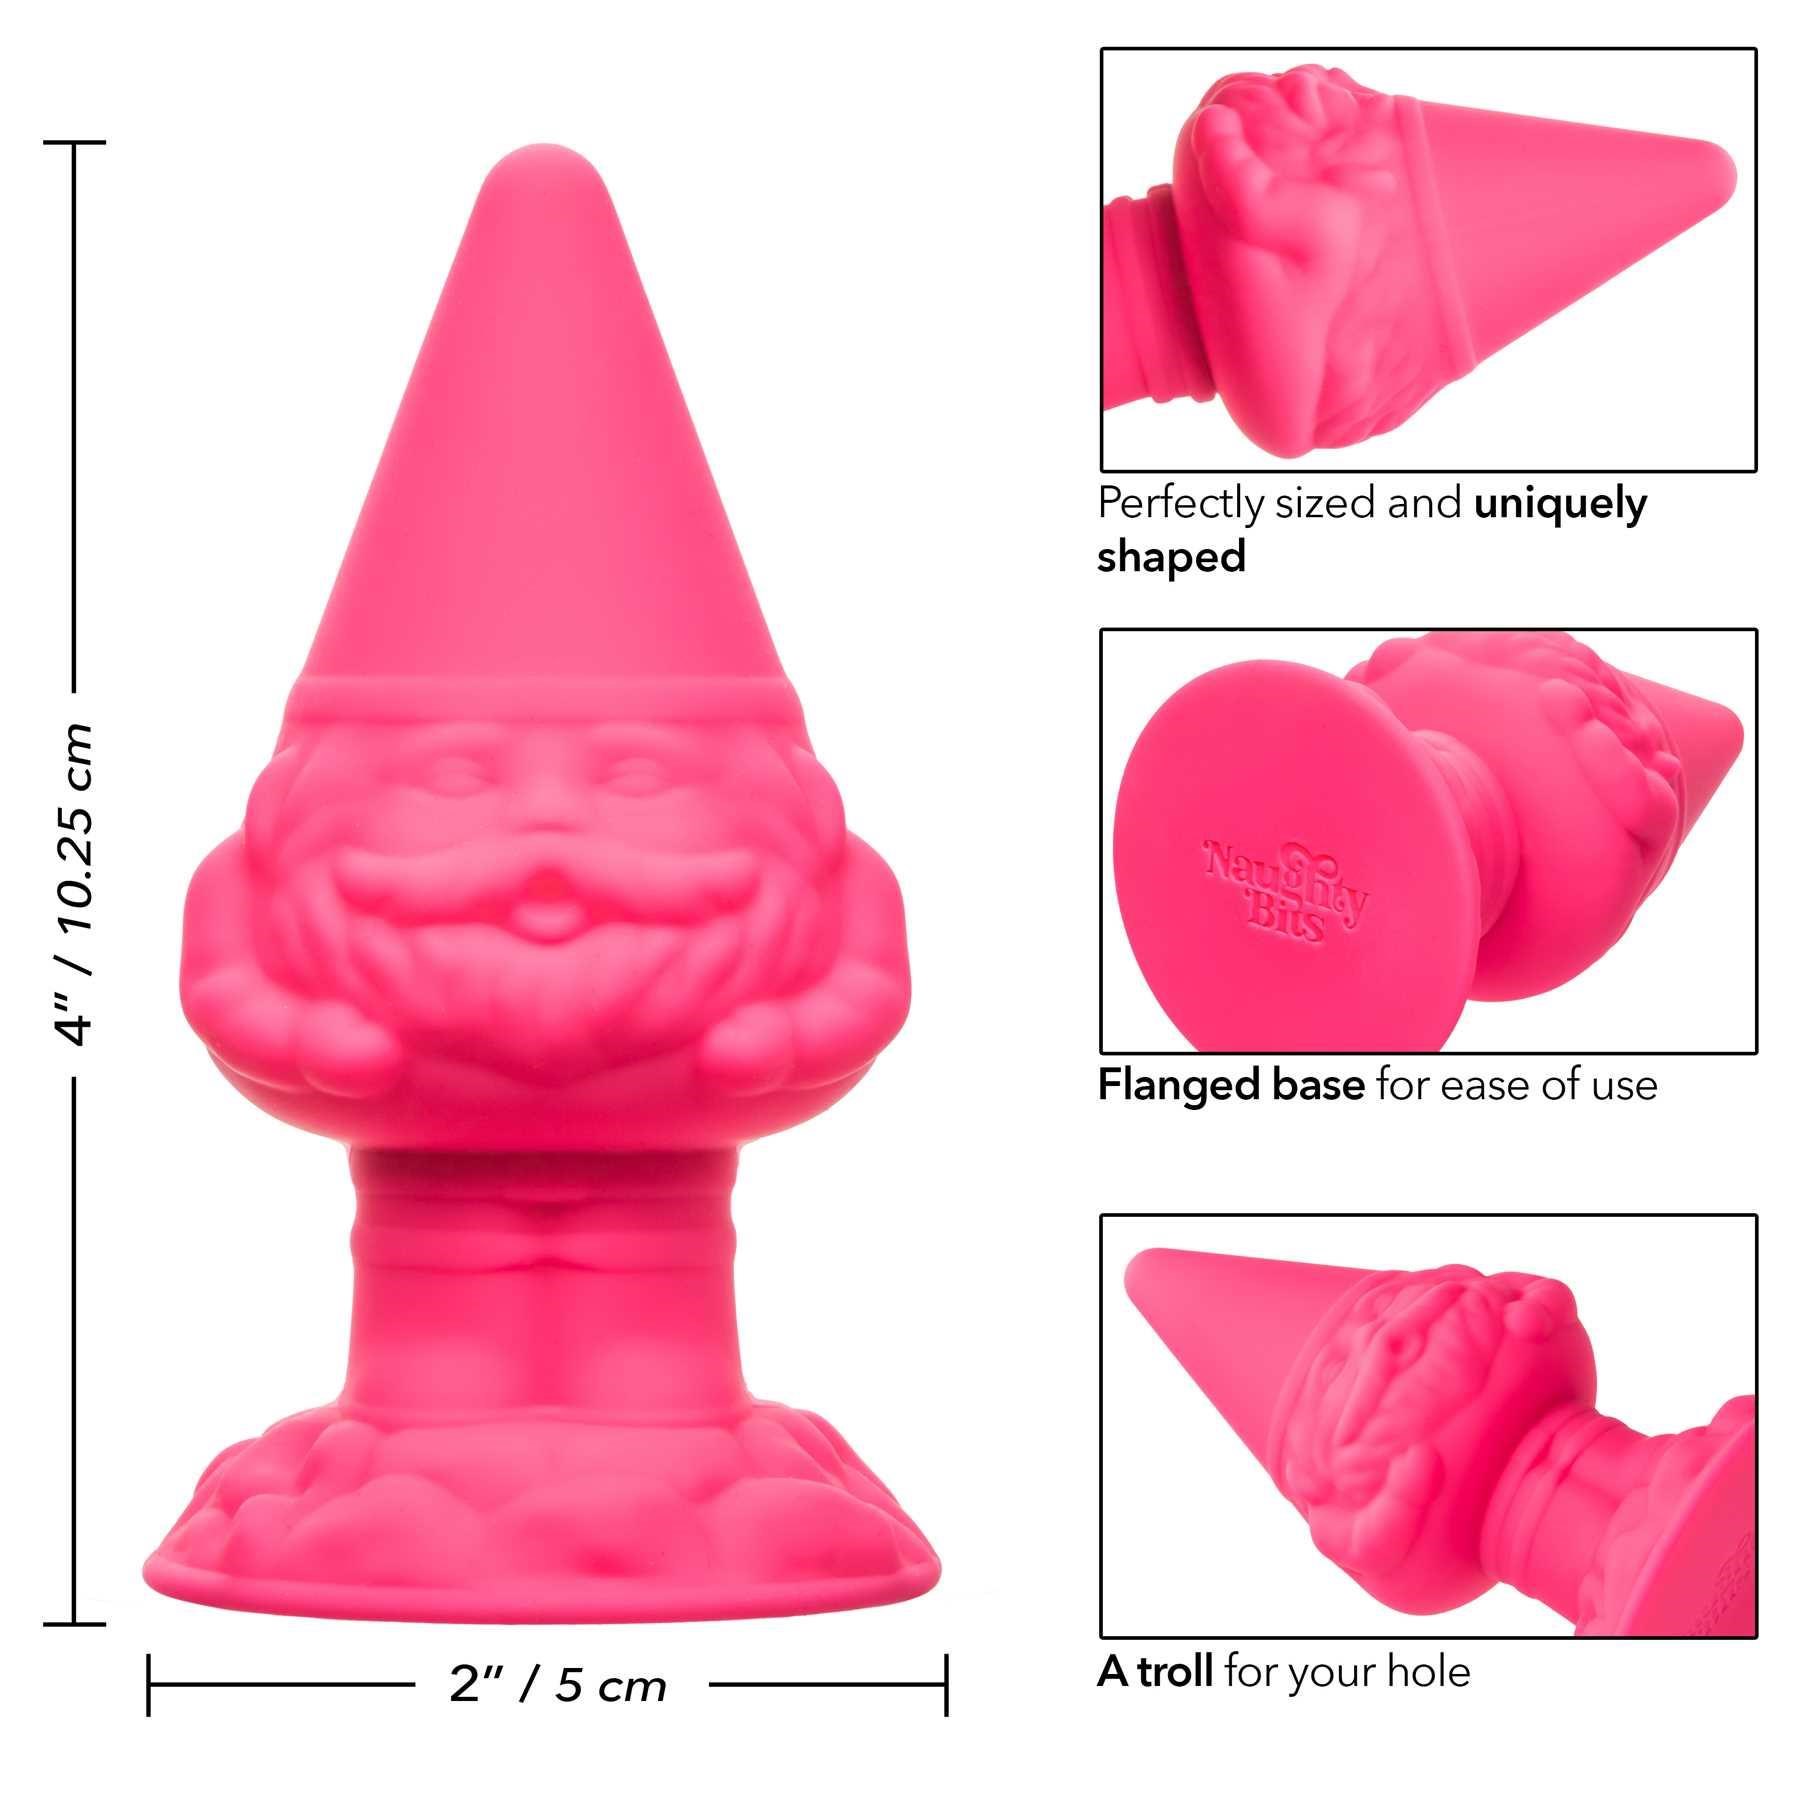 Naughty Bits Anal Gnome Butt Plug features call out sheet